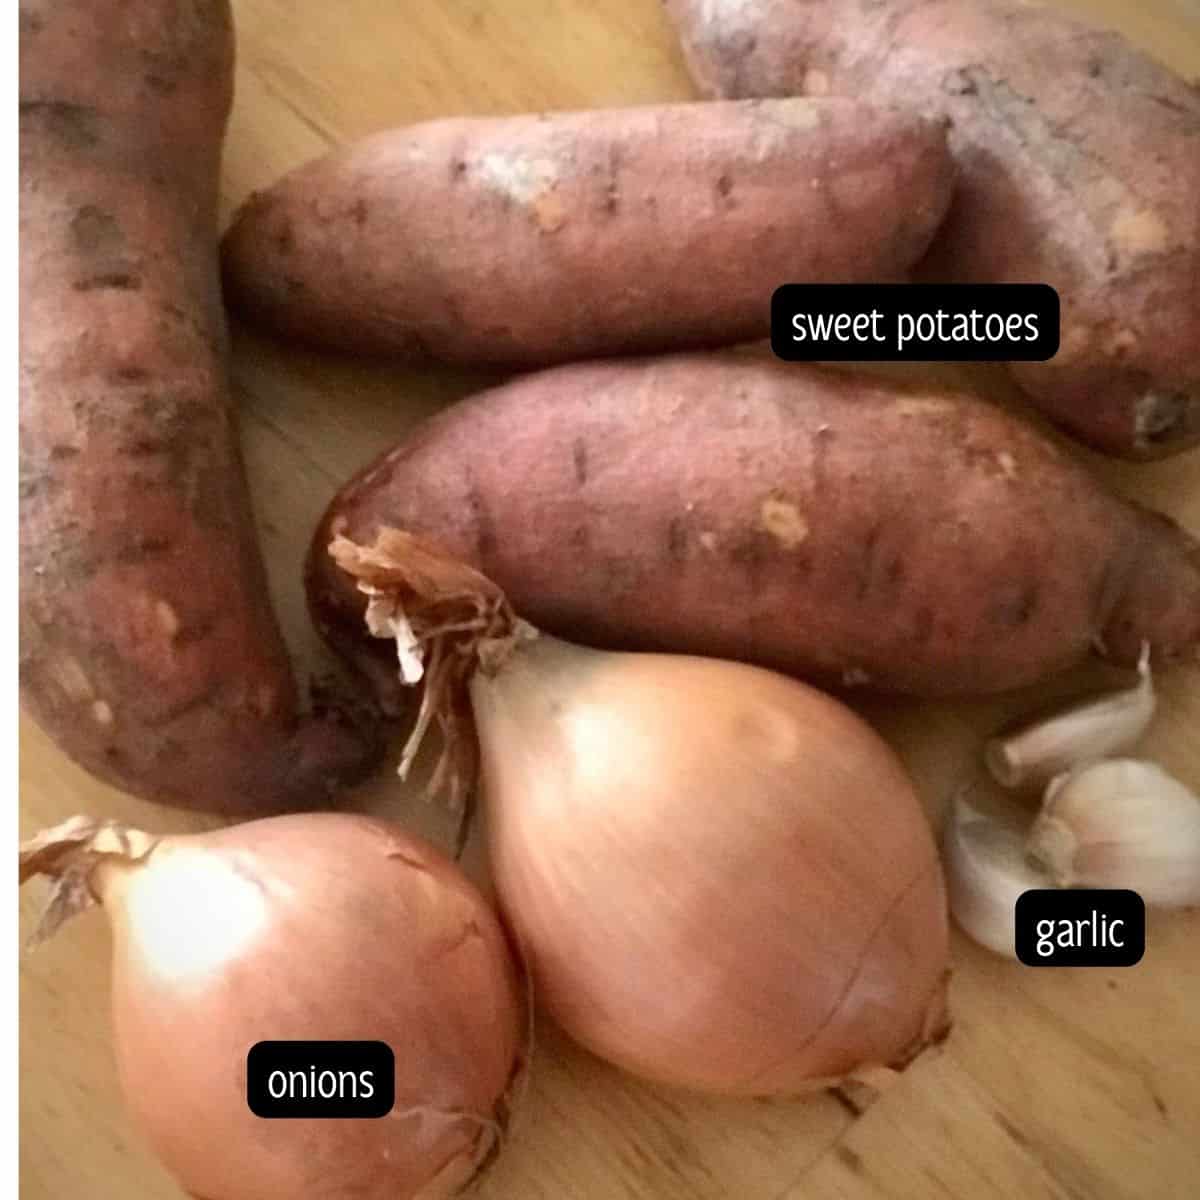 Onions, sweet potatoes and garlic placed on a light brown background.